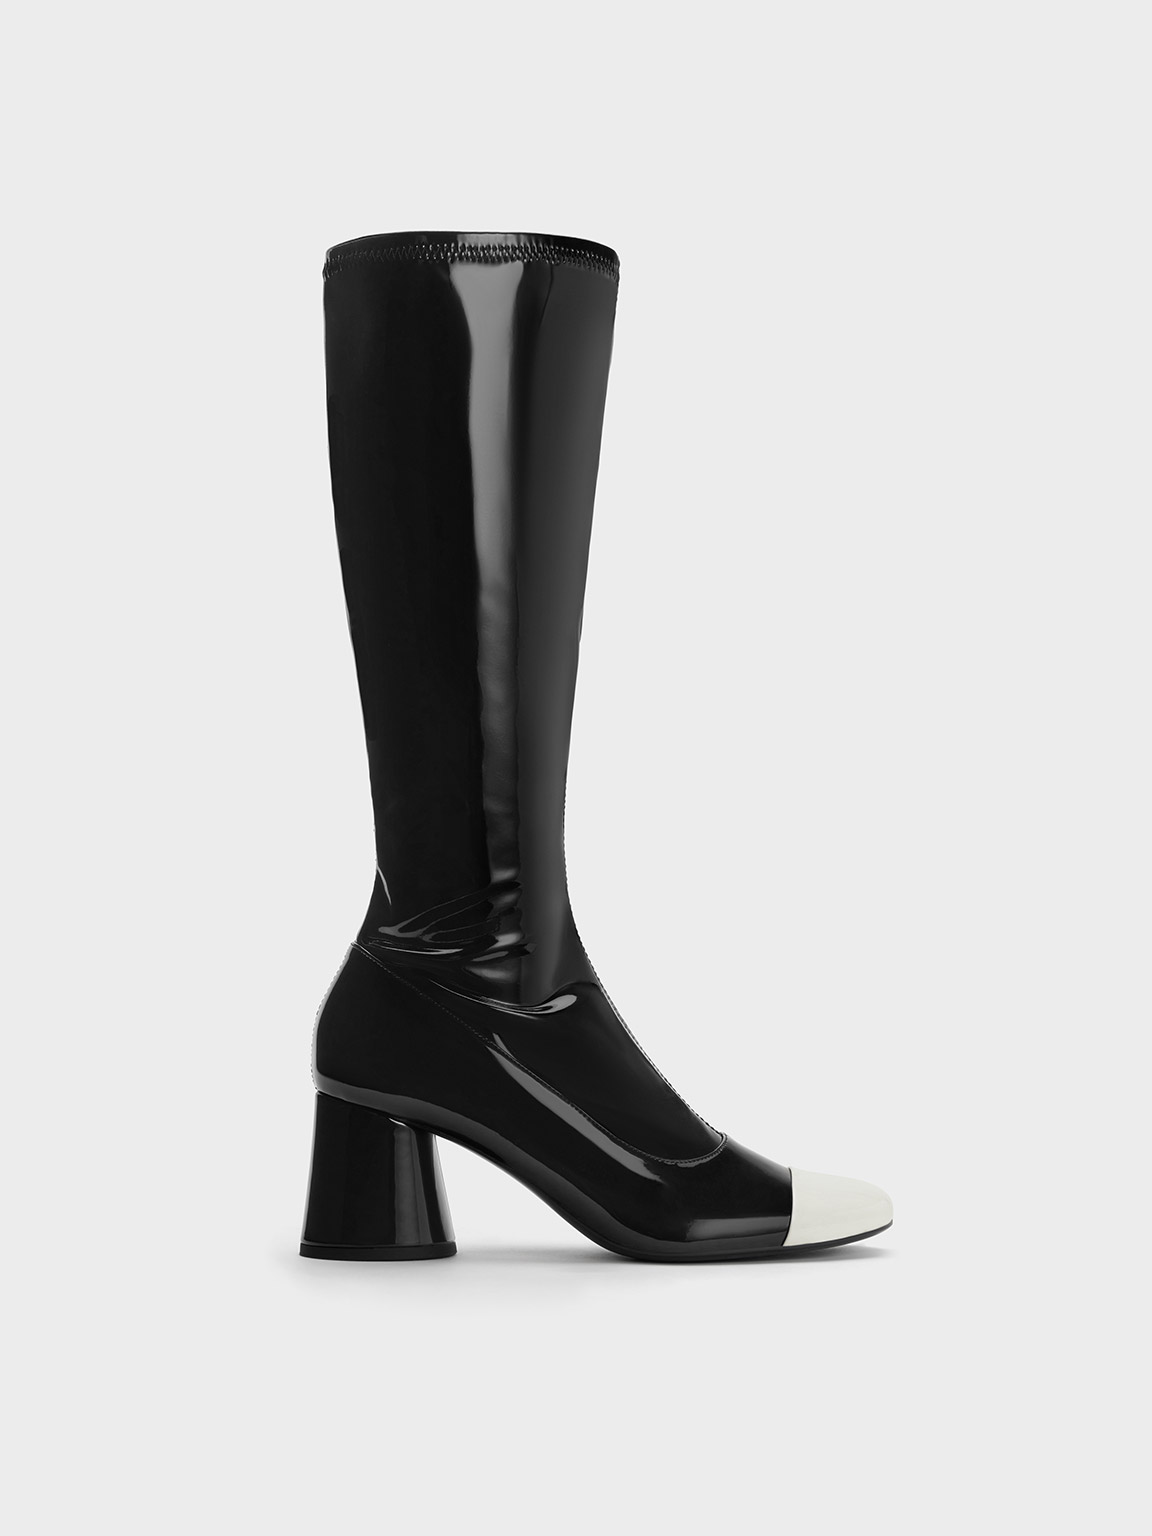 Coco Two-Tone Knee-High Boots